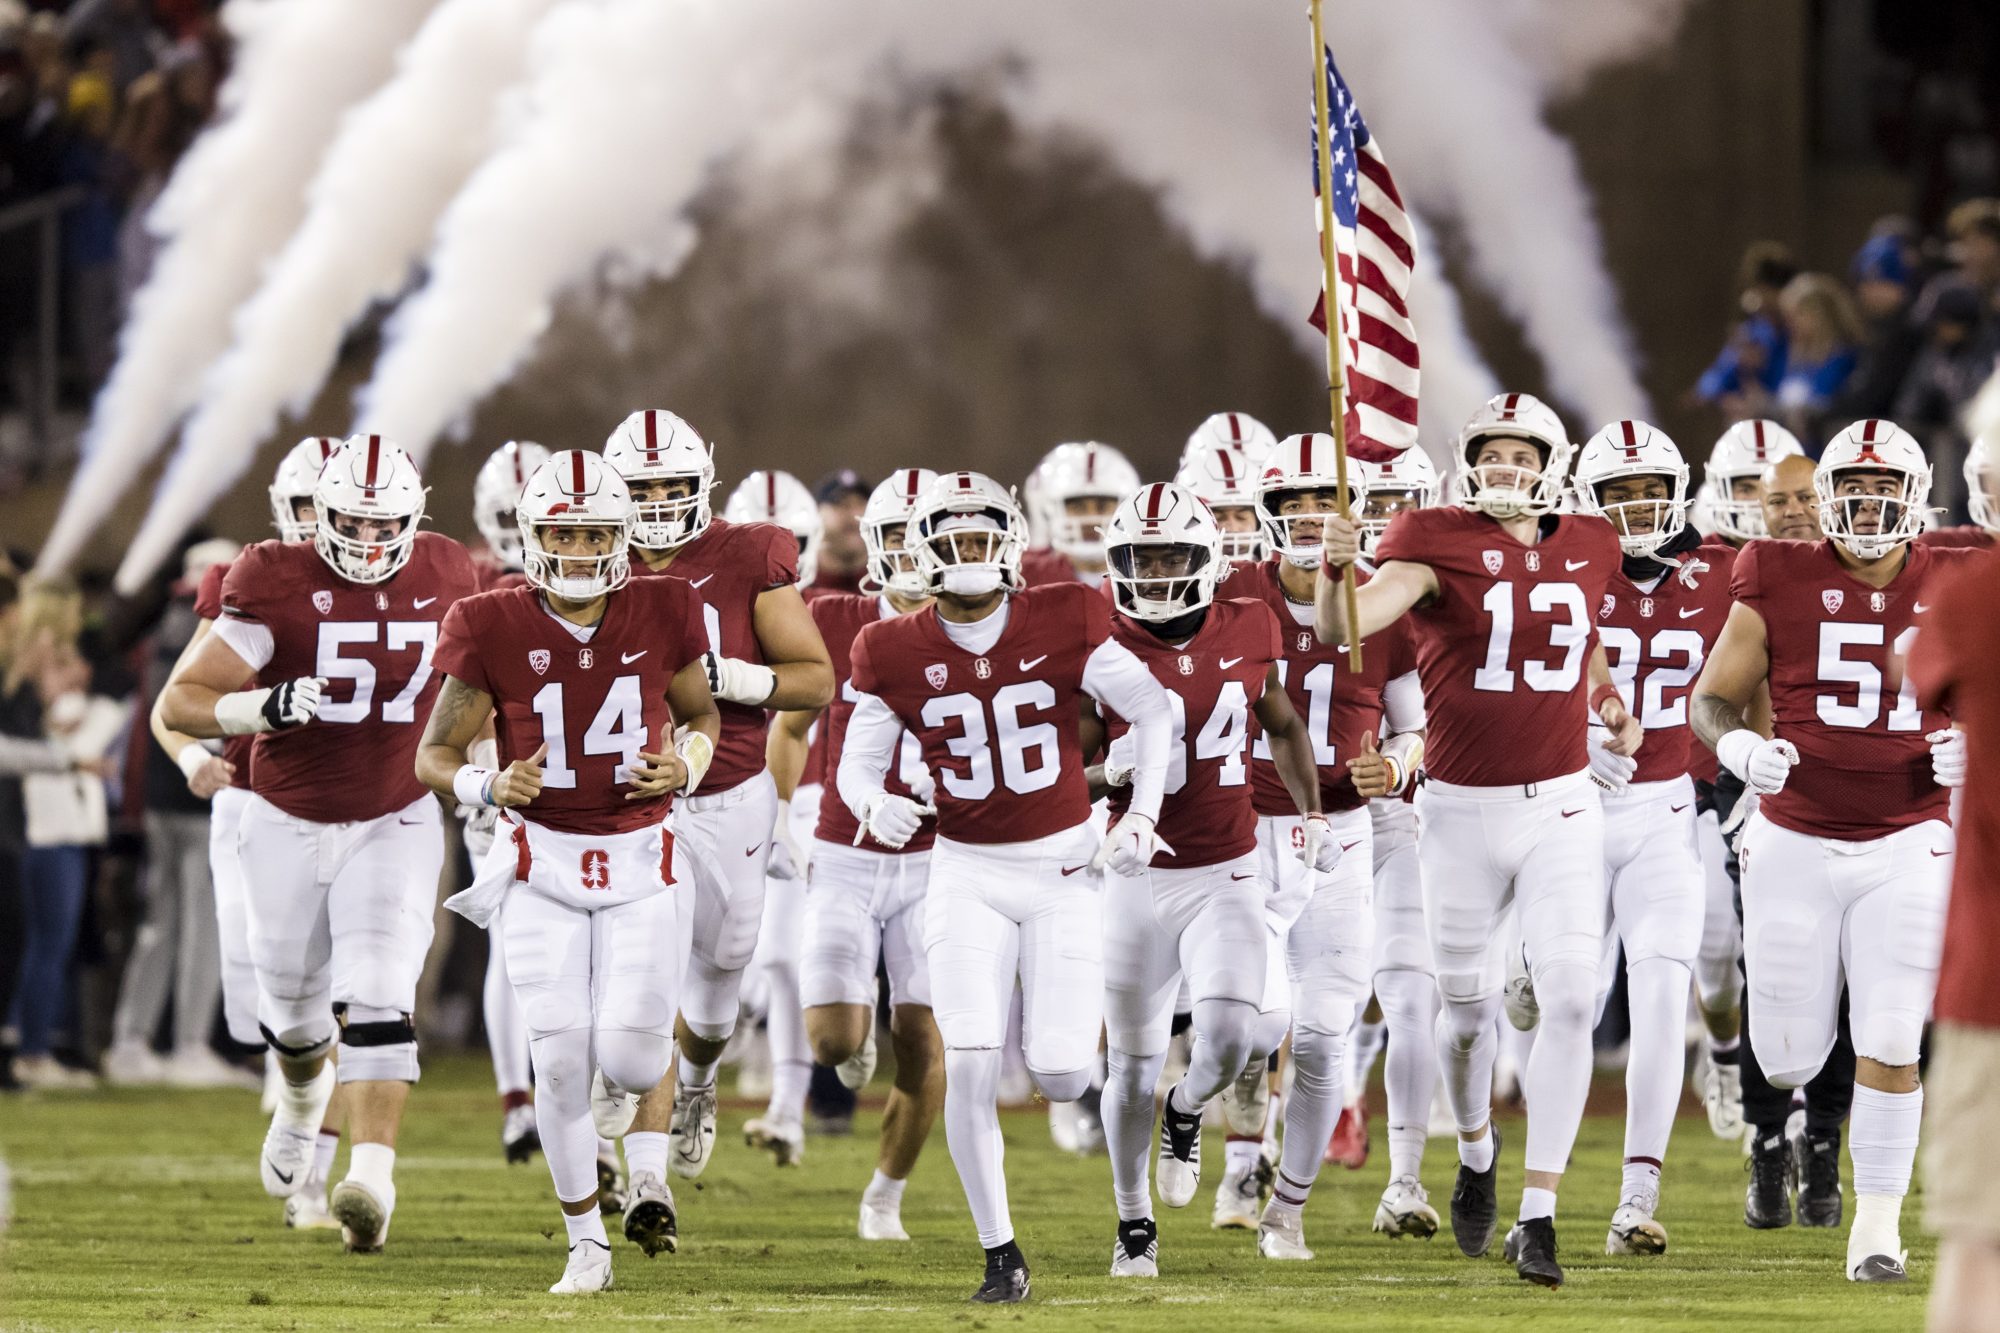 The Stanford Cardinal take the field before the game against the Brigham Young Cougars at Stanford Stadium. Mandatory Credit: